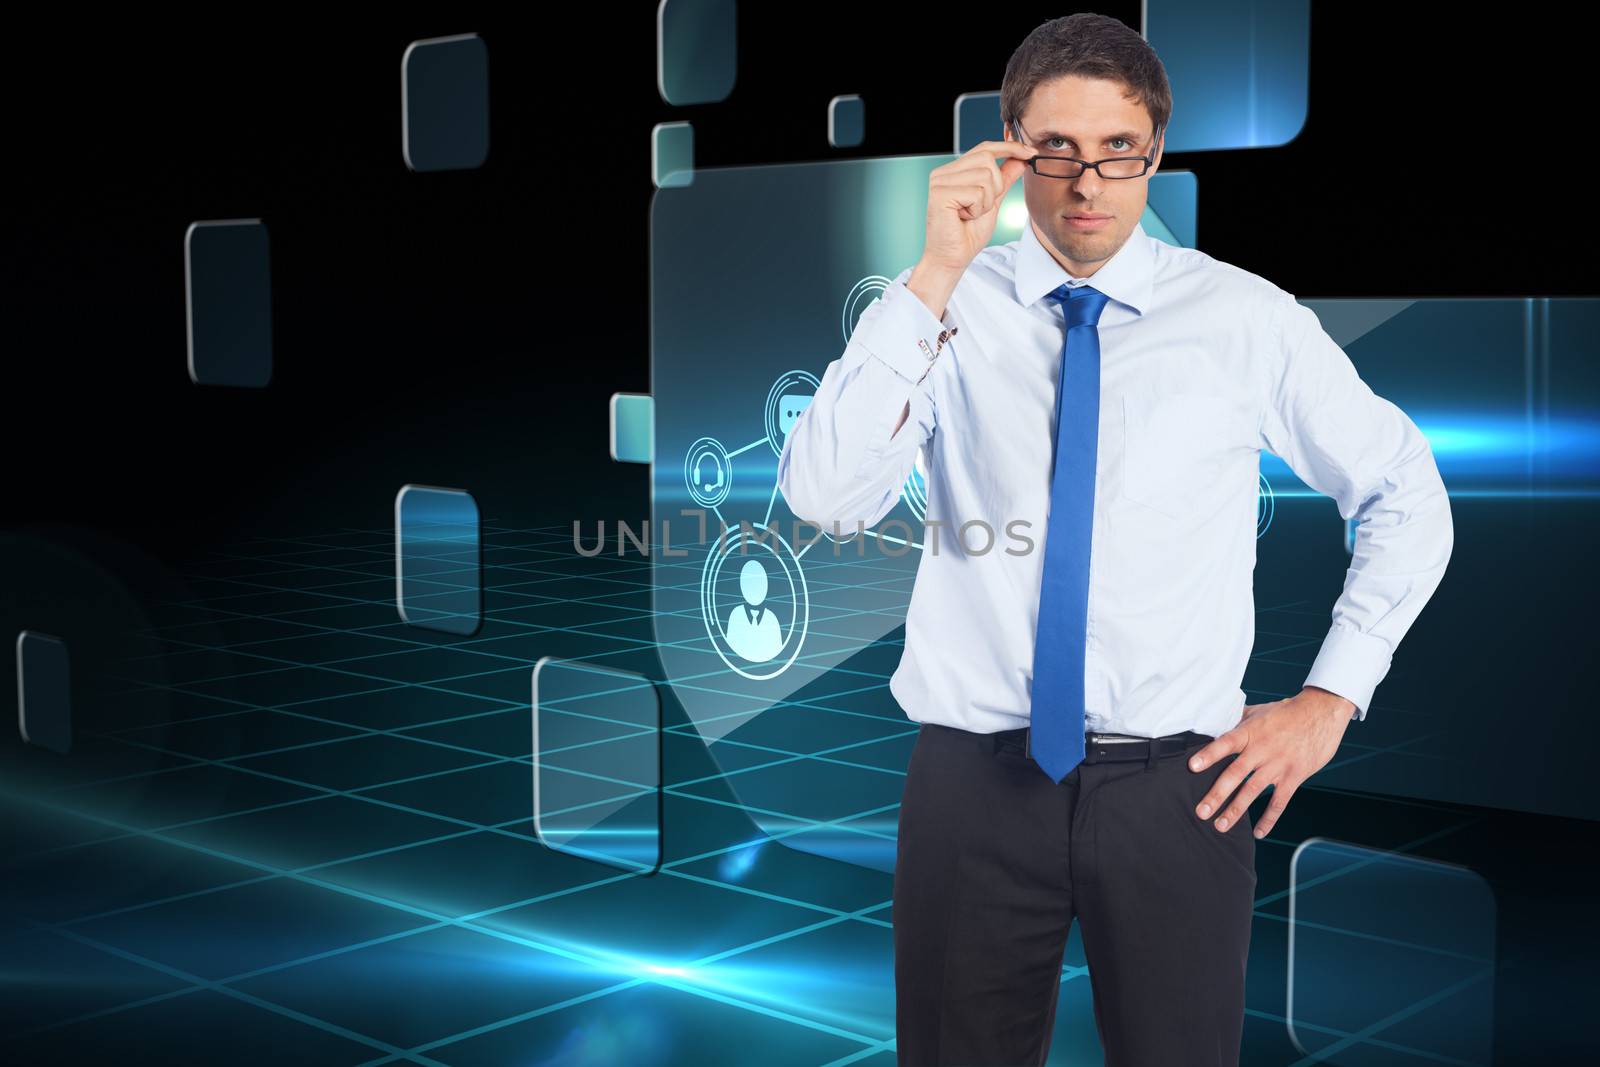 Thinking businessman tilting glasses against futuristic technology interface